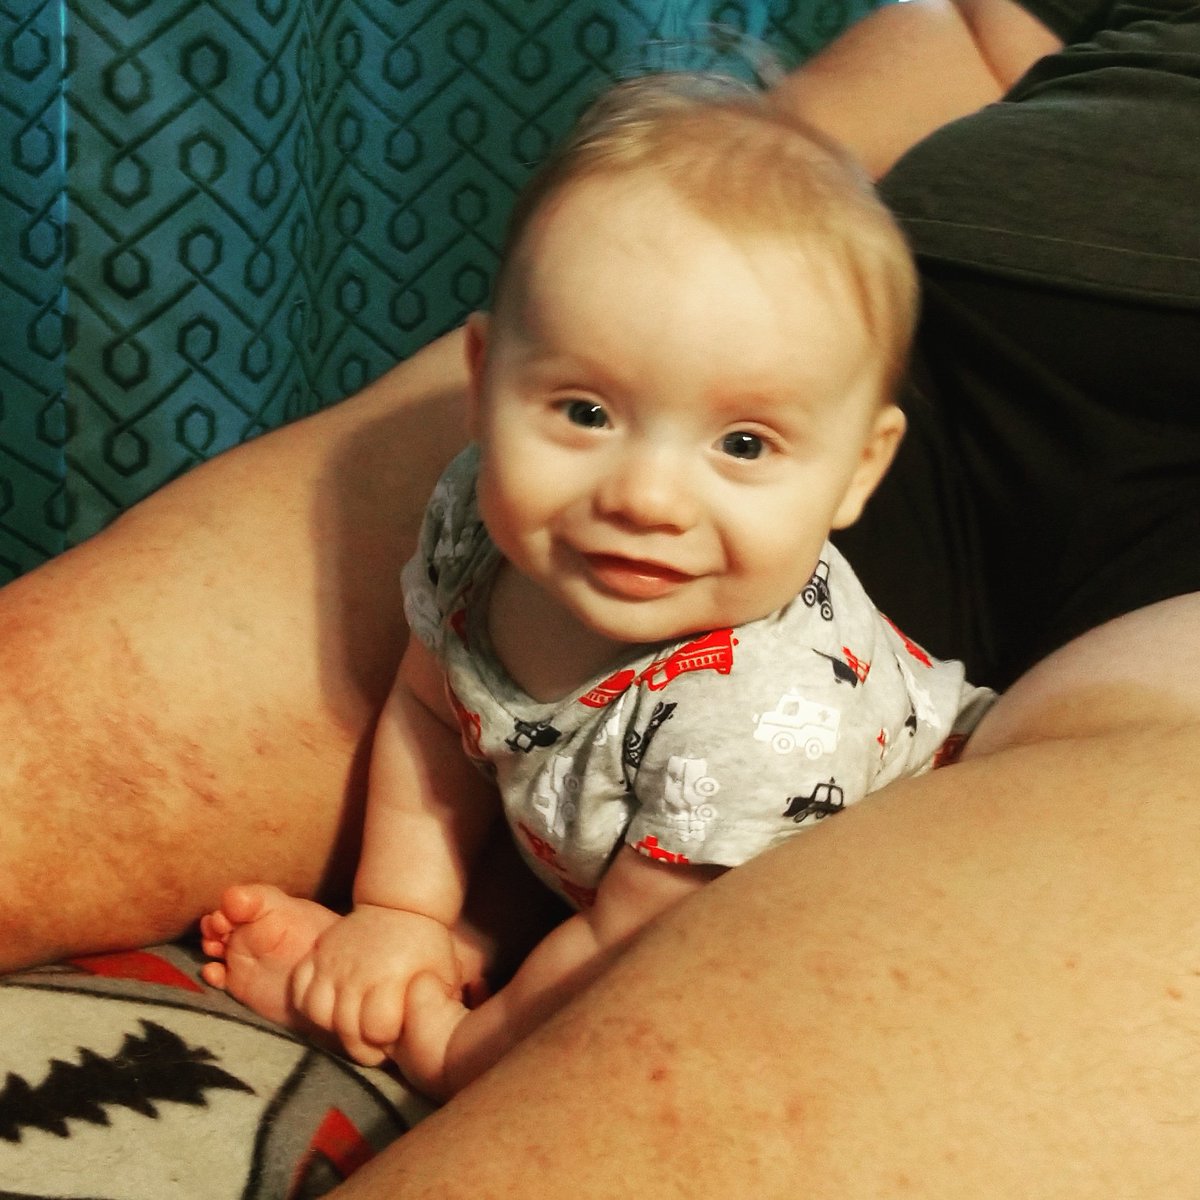 Can you tell he's proud of himself for this #tripodsit? #4monthsold #developmentalmilestone #babyhaus